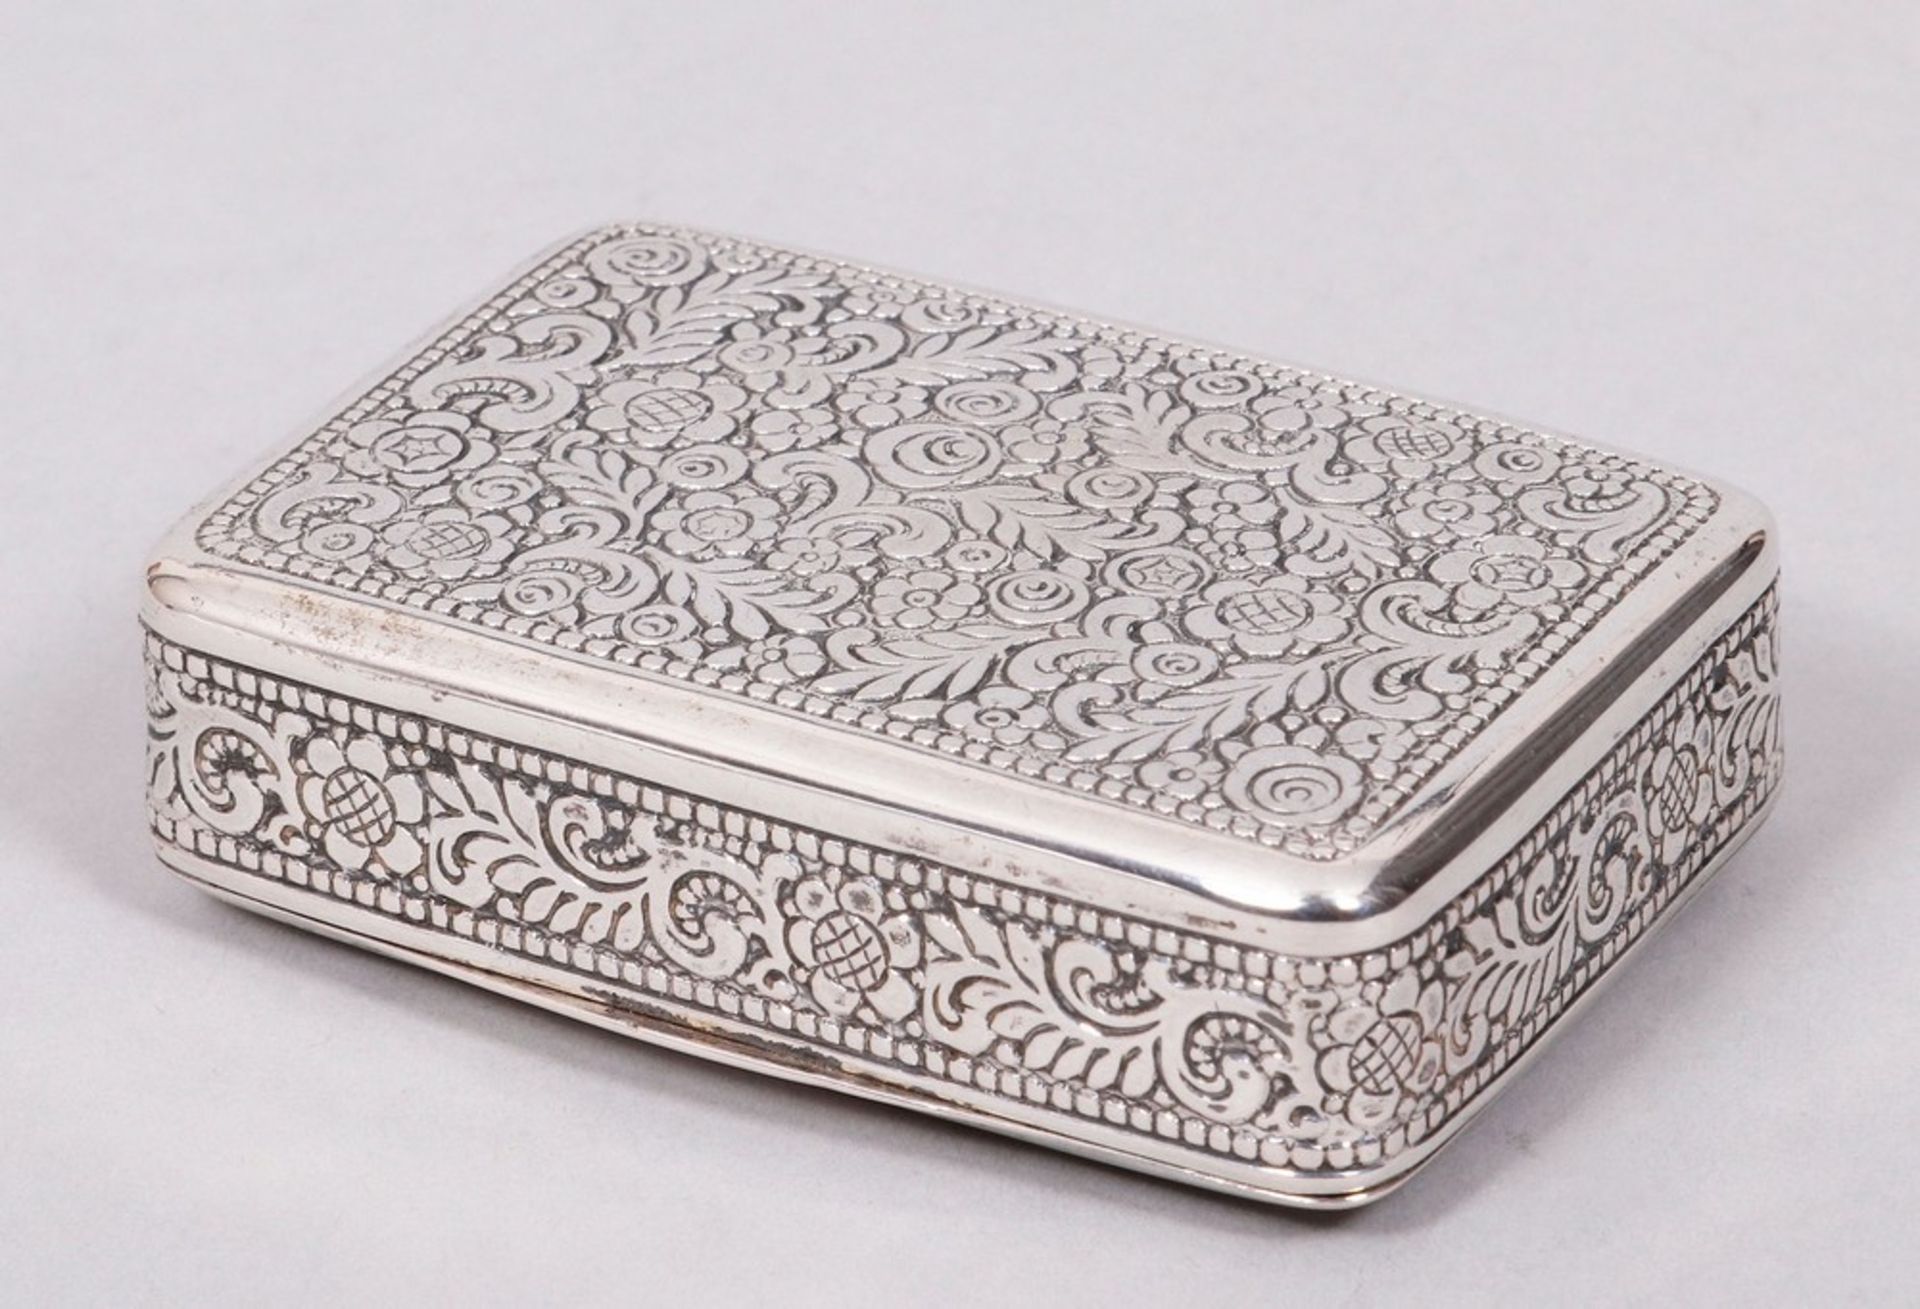 Small lidded box, 800 silver, partially gilt, German, early 20th C. - Image 4 of 4